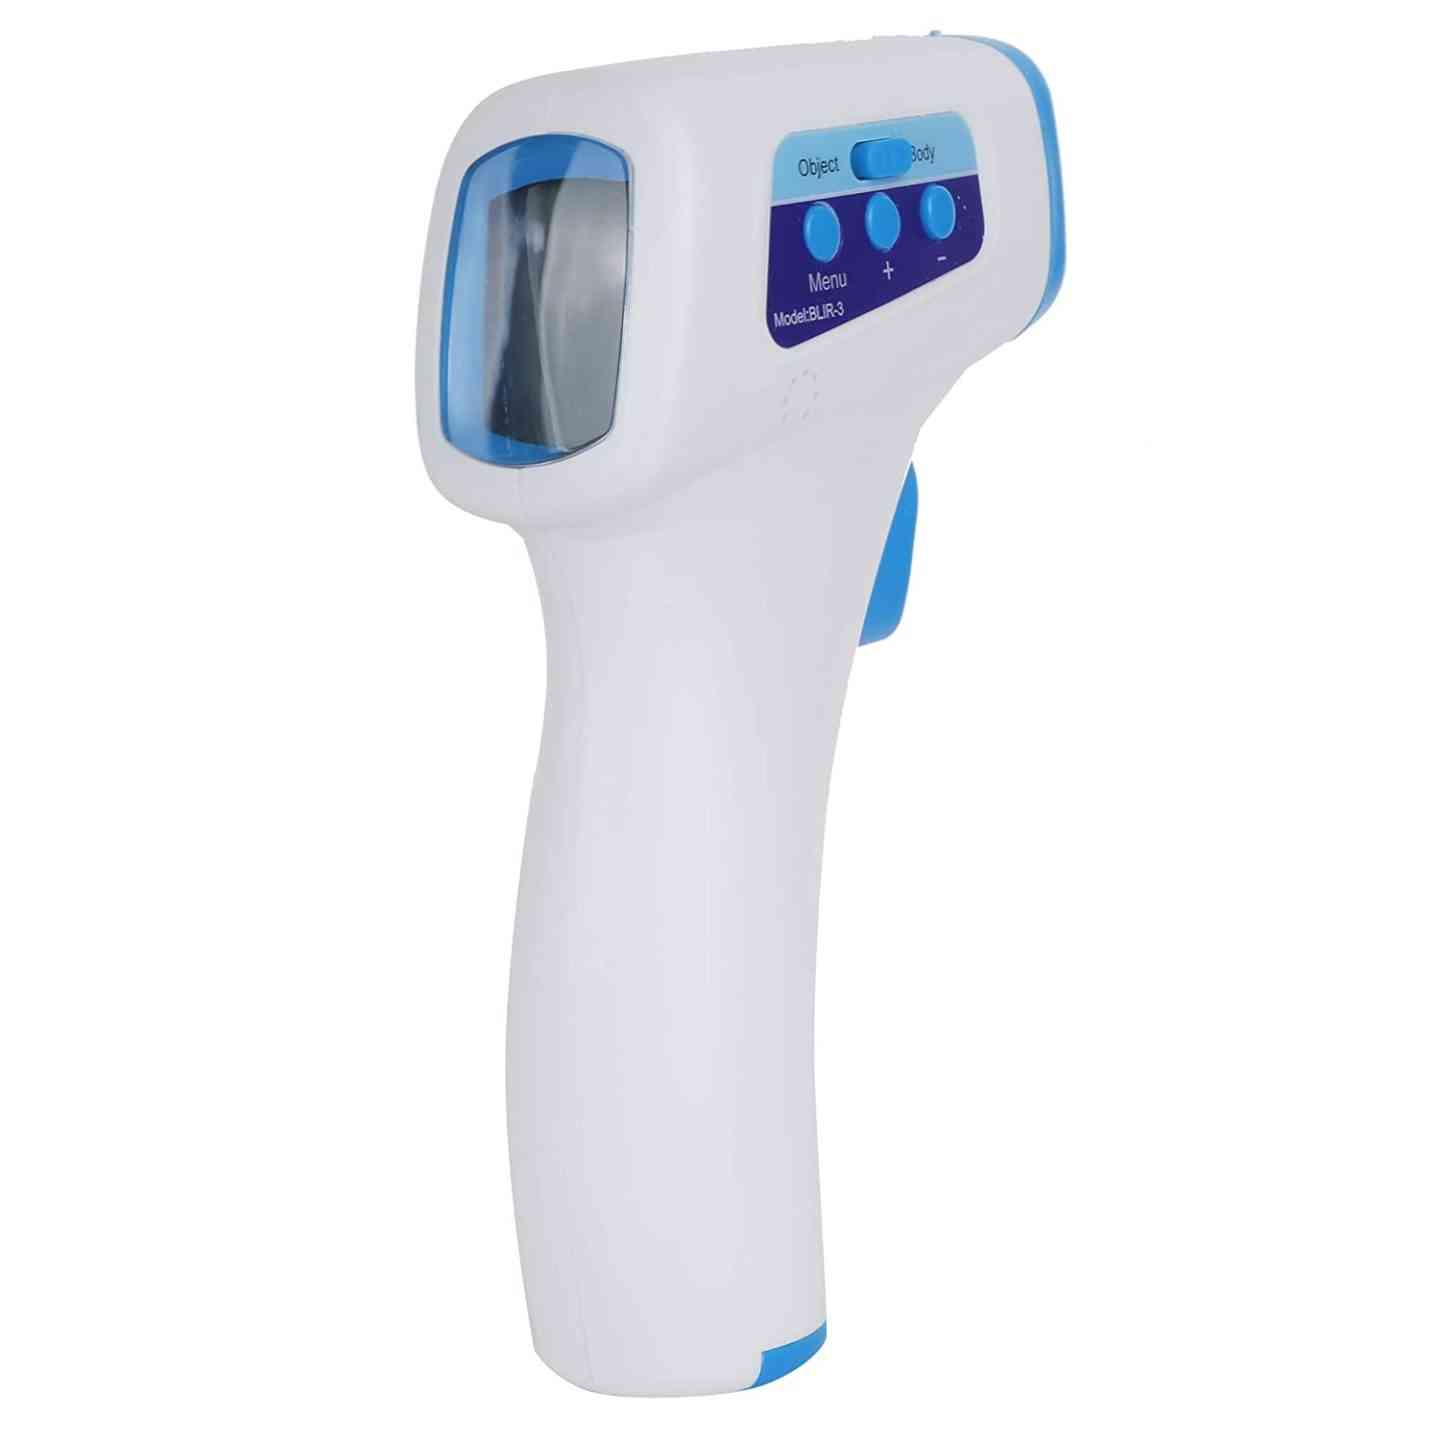 Babyly Non-Contact Infrared Thermometer Sri Lanka